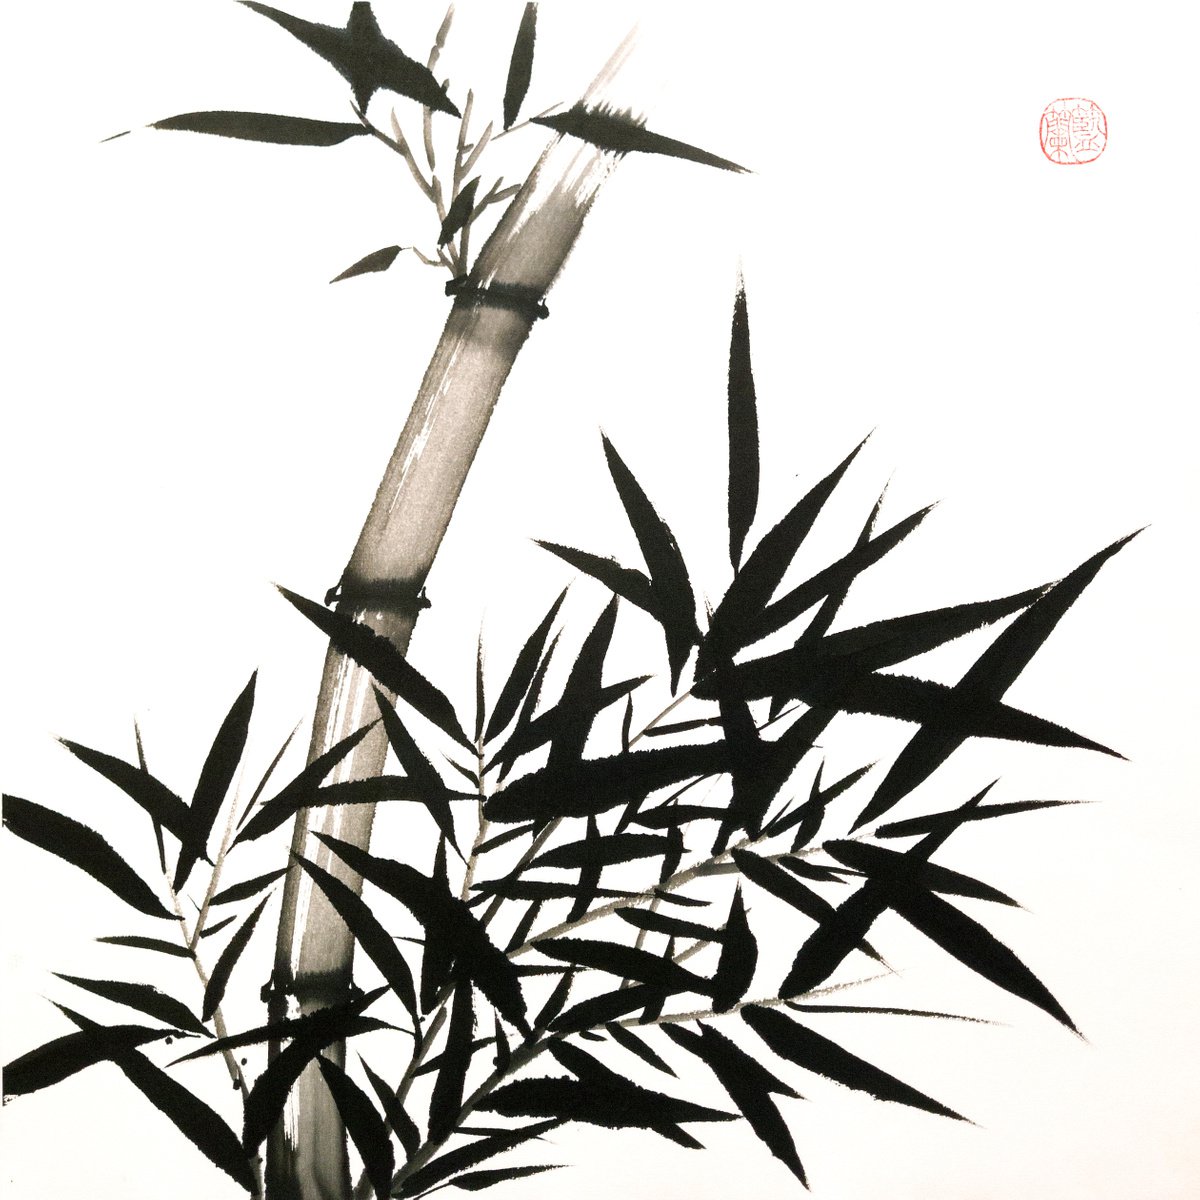 Dense bamboo thickets  - Bamboo series No. 2116 - Oriental Chinese Ink Painting by Ilana Shechter